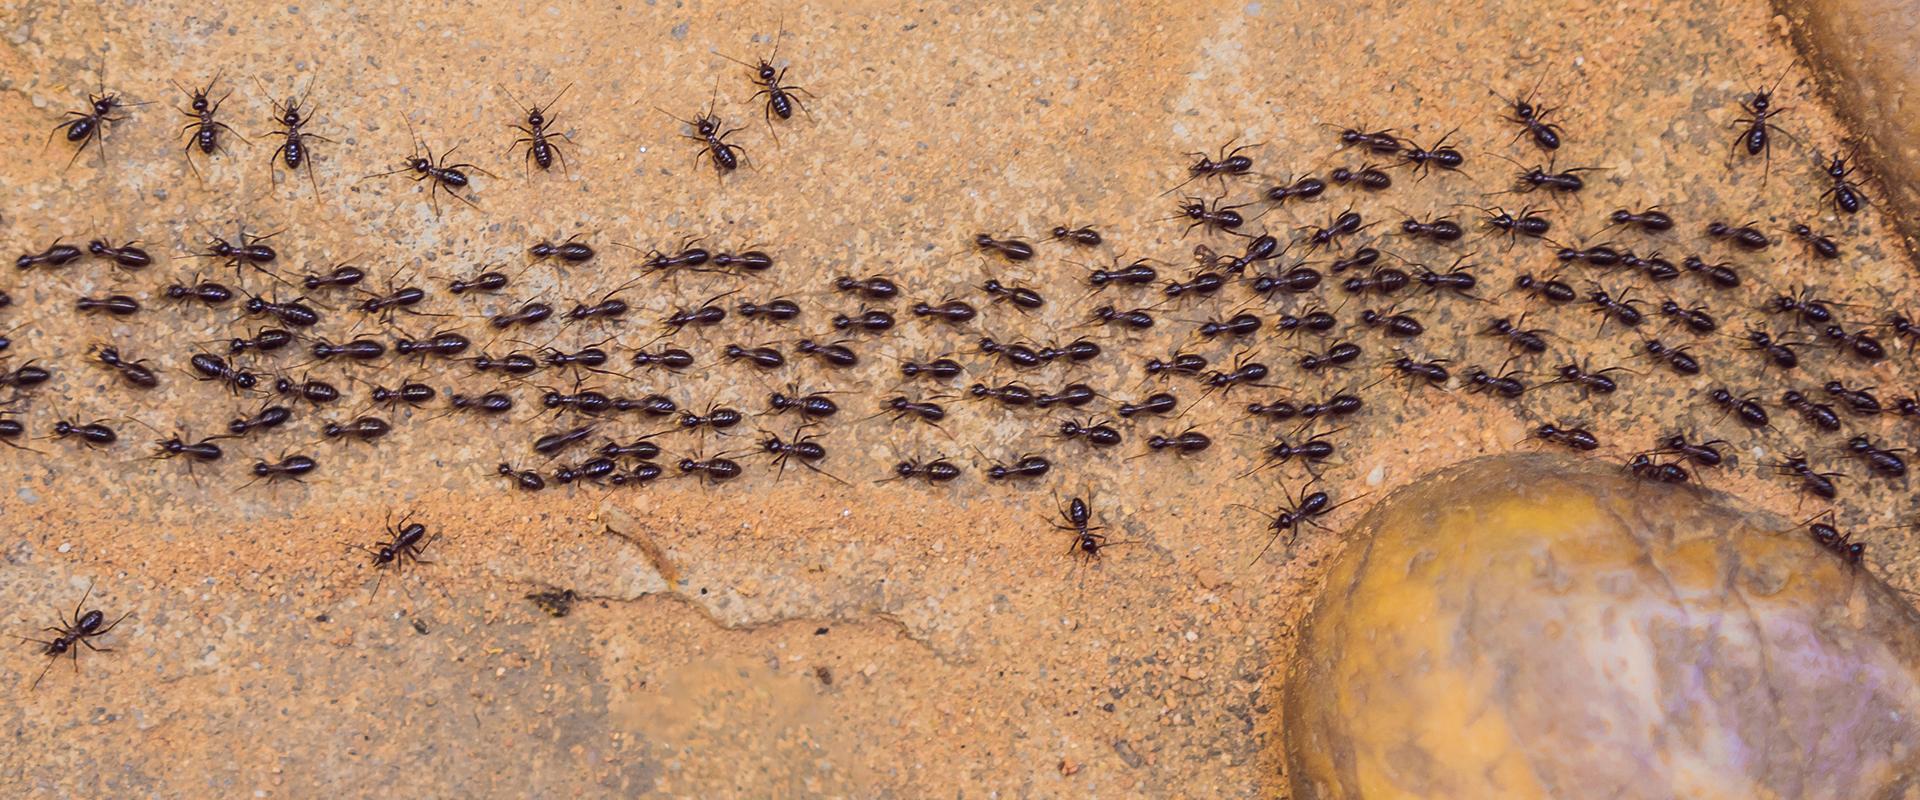 ants crawling on dirt